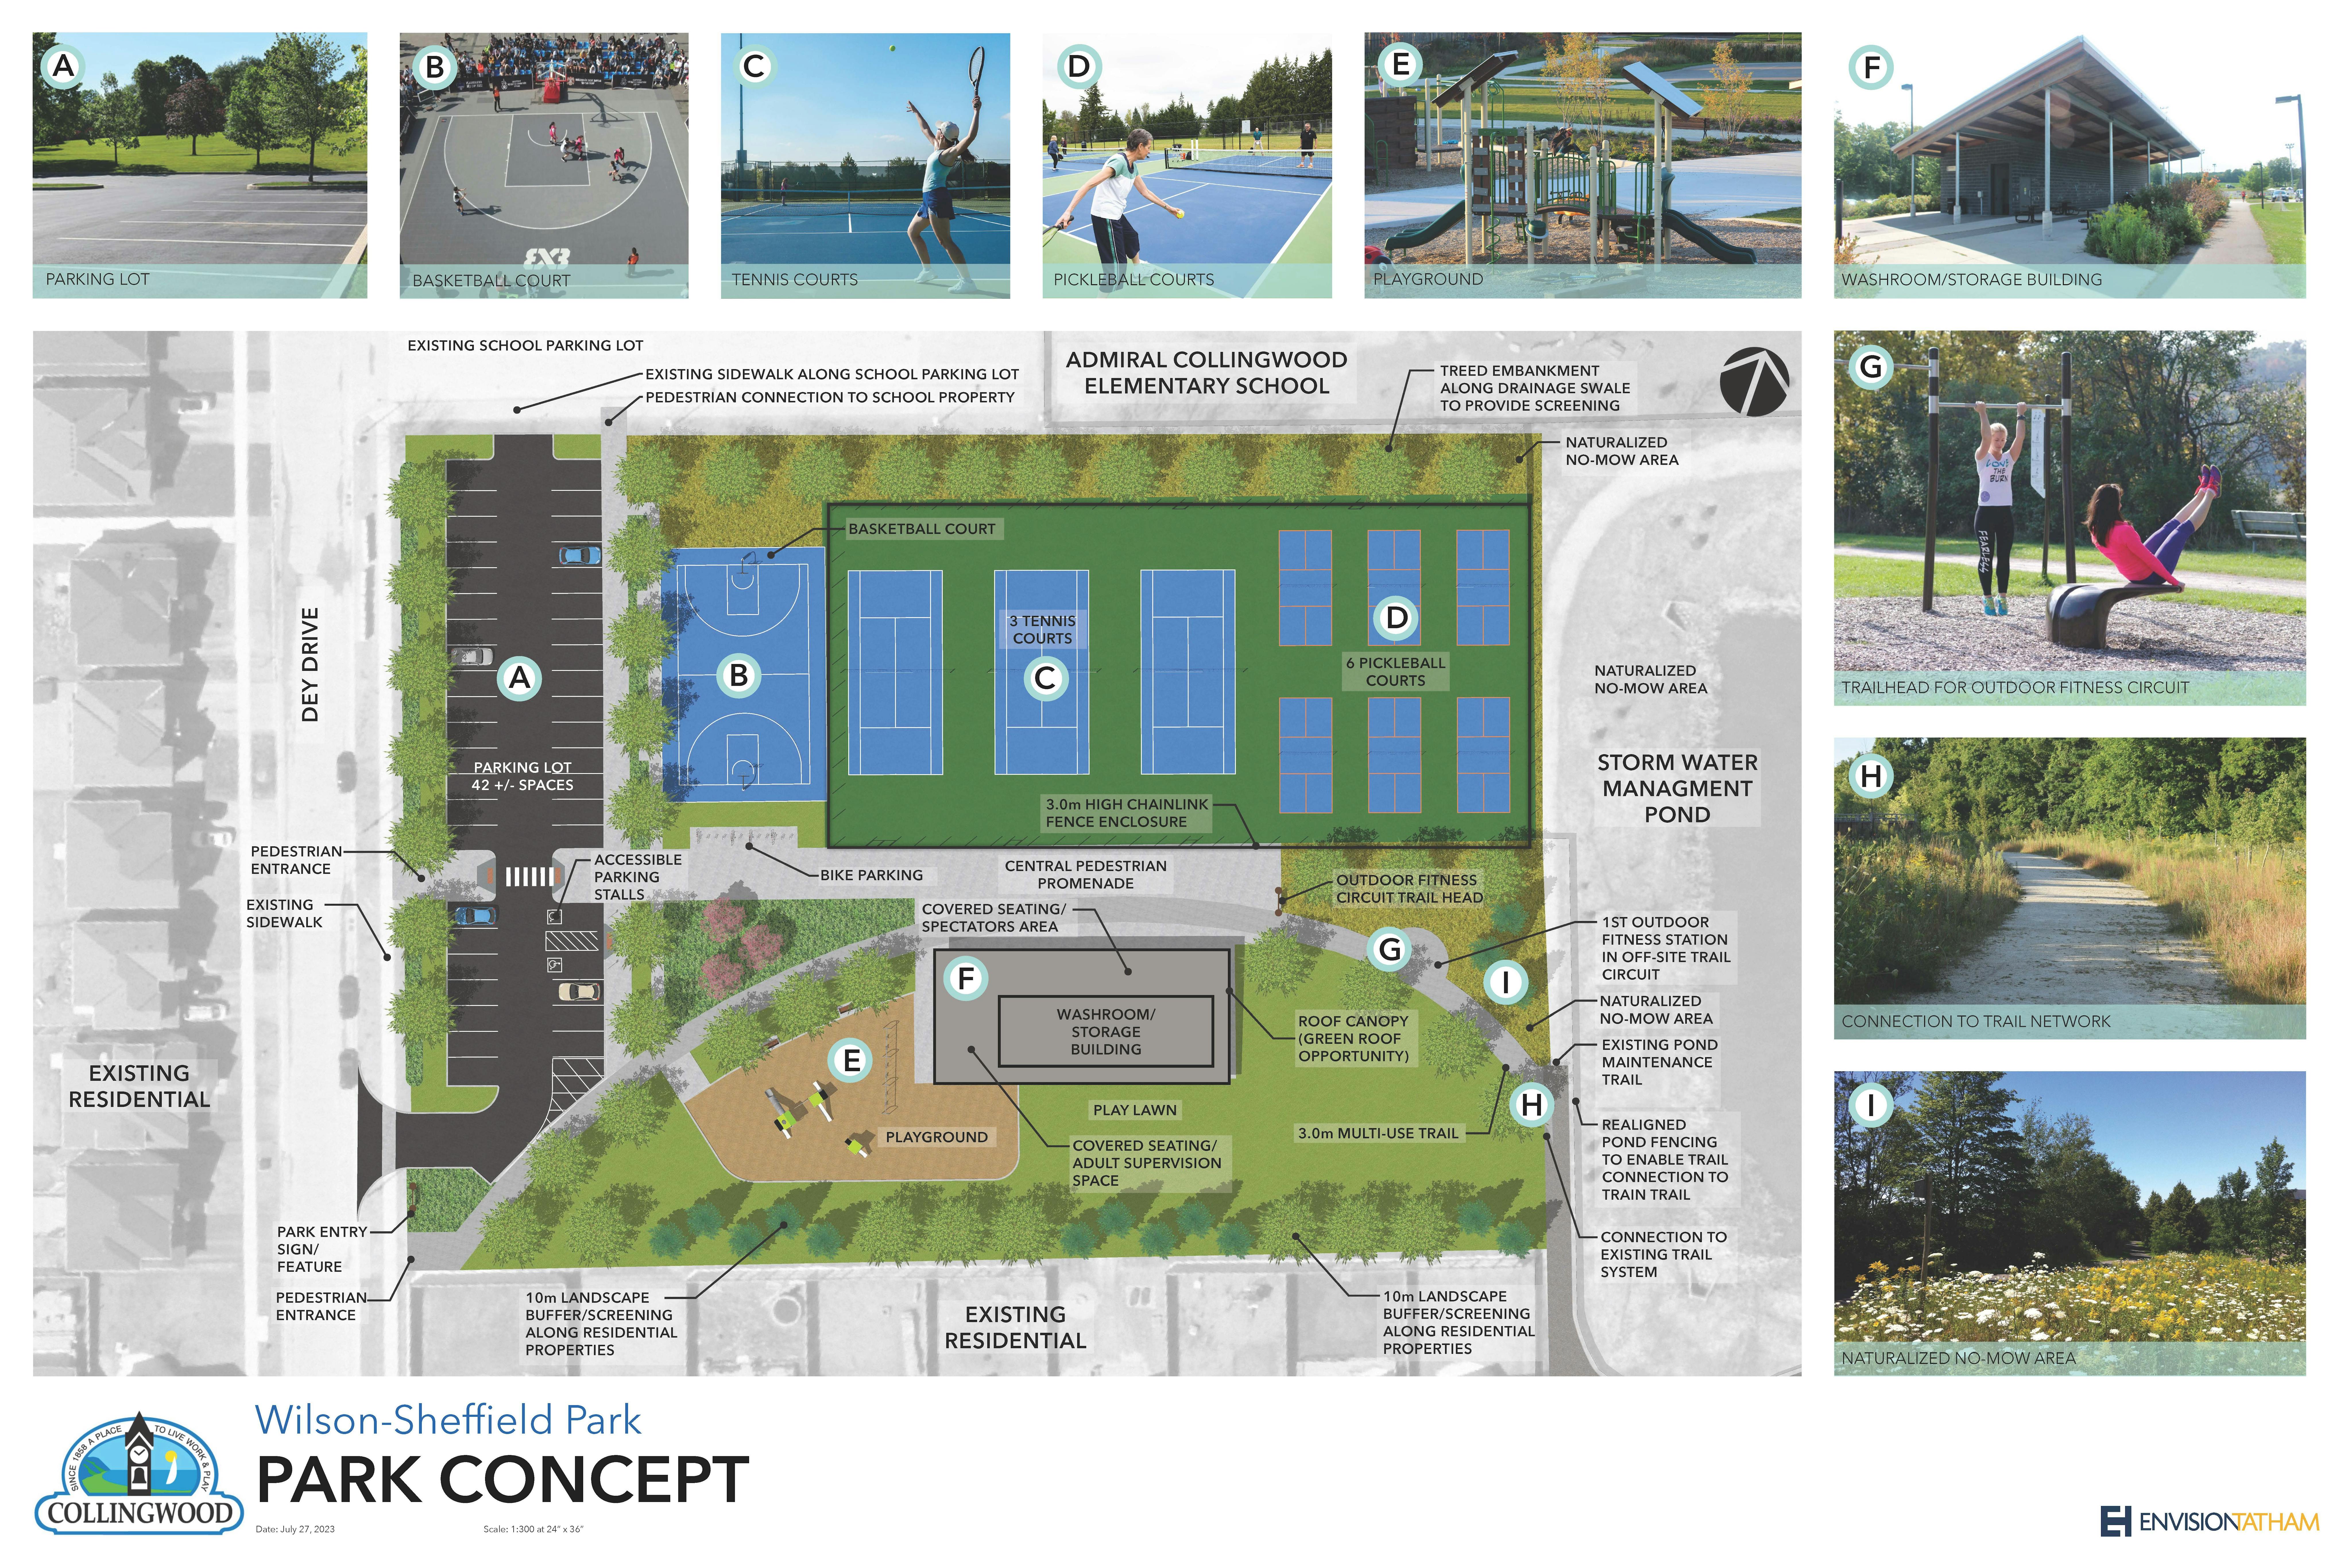 Concept drawing of Wilson-Sheffield Community Park showing various usages including green space, trail access, fitness loop, accessible washrooms, playground equipment, pickleball, tennis, basketball, and parking.